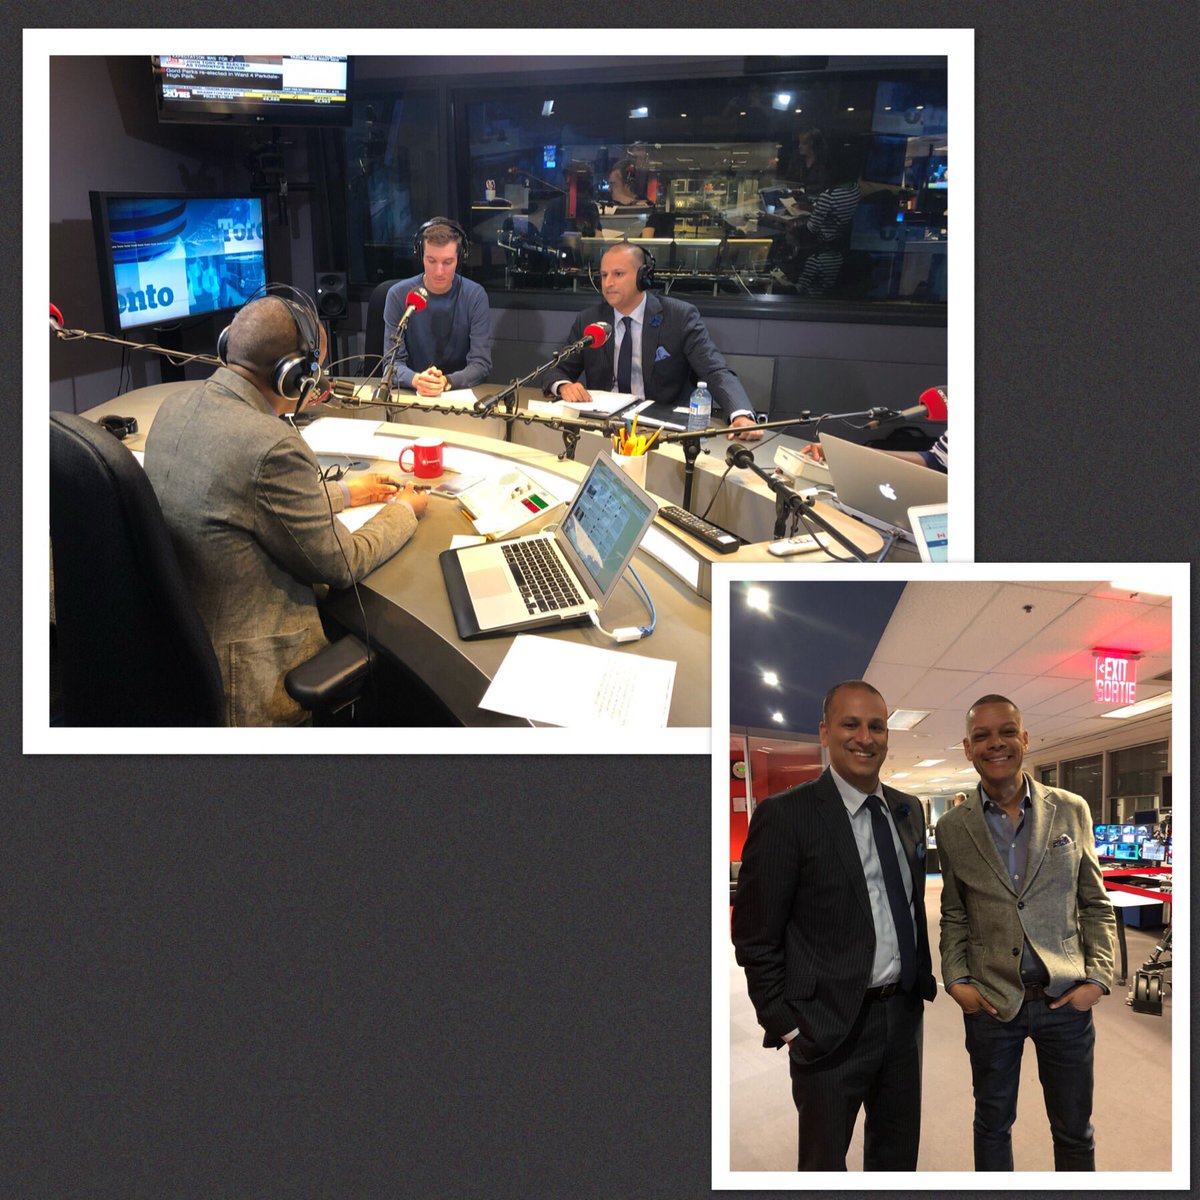 The voice of Toronto many would say is Matt Galloway, host of CBC’s Metro Morning and I had the chance to sit down with Matt & @johnrieti to provide perspectives on our city and the recent elections. Listen in here: cbc.ca/player/play/13…